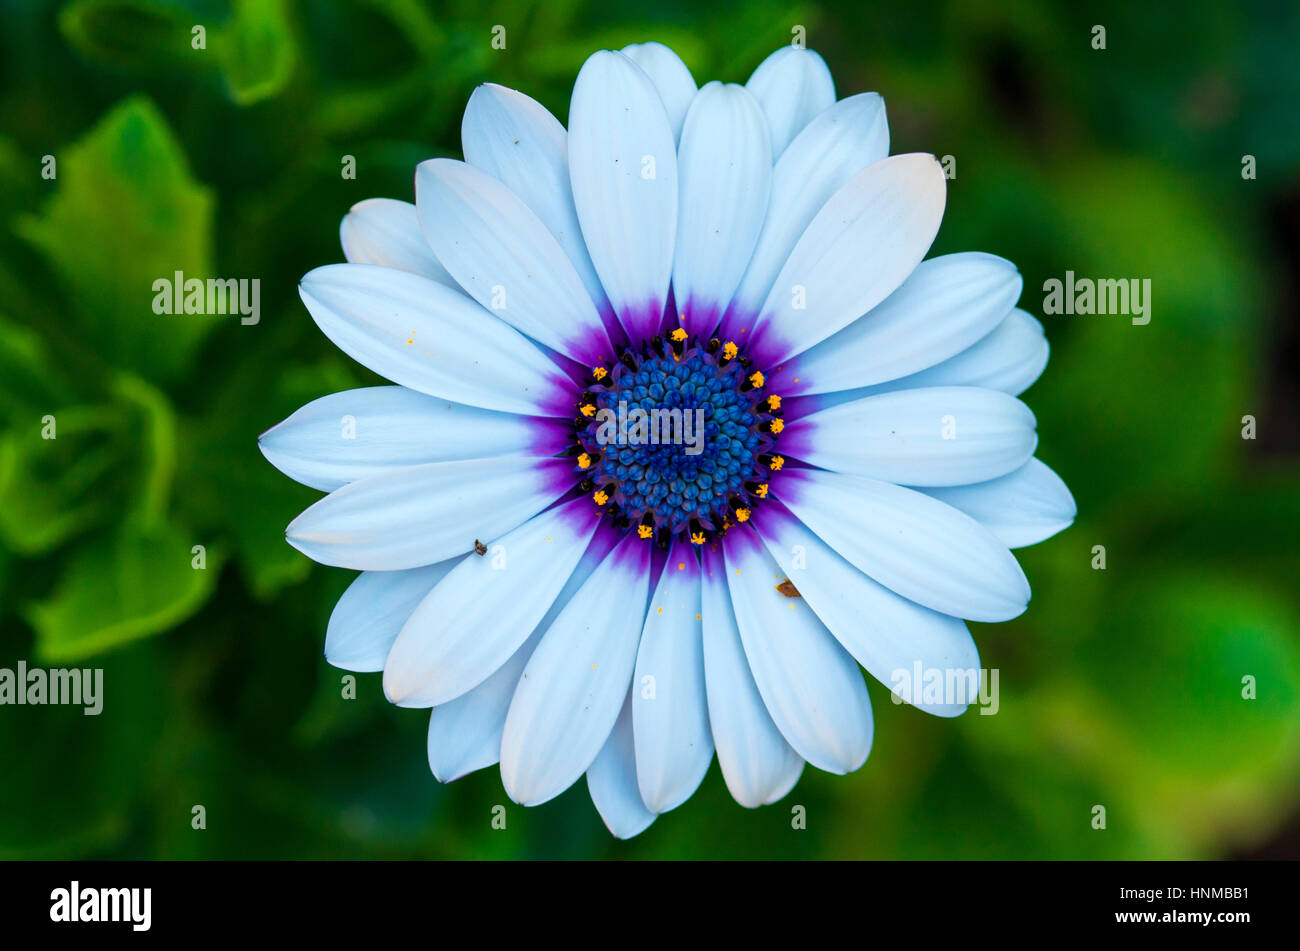 Colorful daisy flower in the garden. Stock Photo